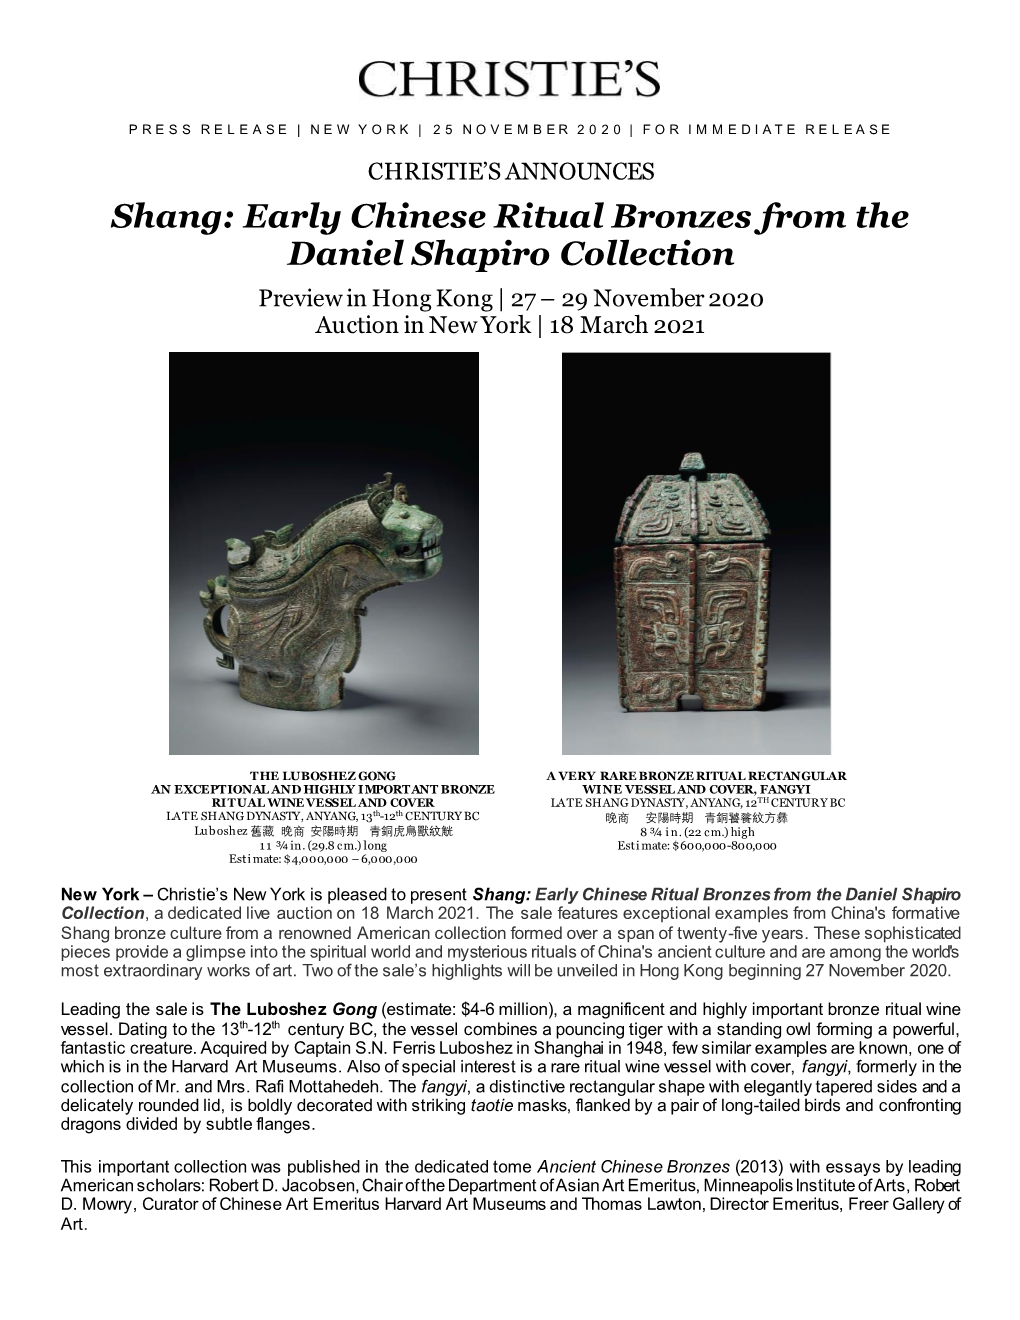 Early Chinese Ritual Bronzes from the Daniel Shapiro Collection